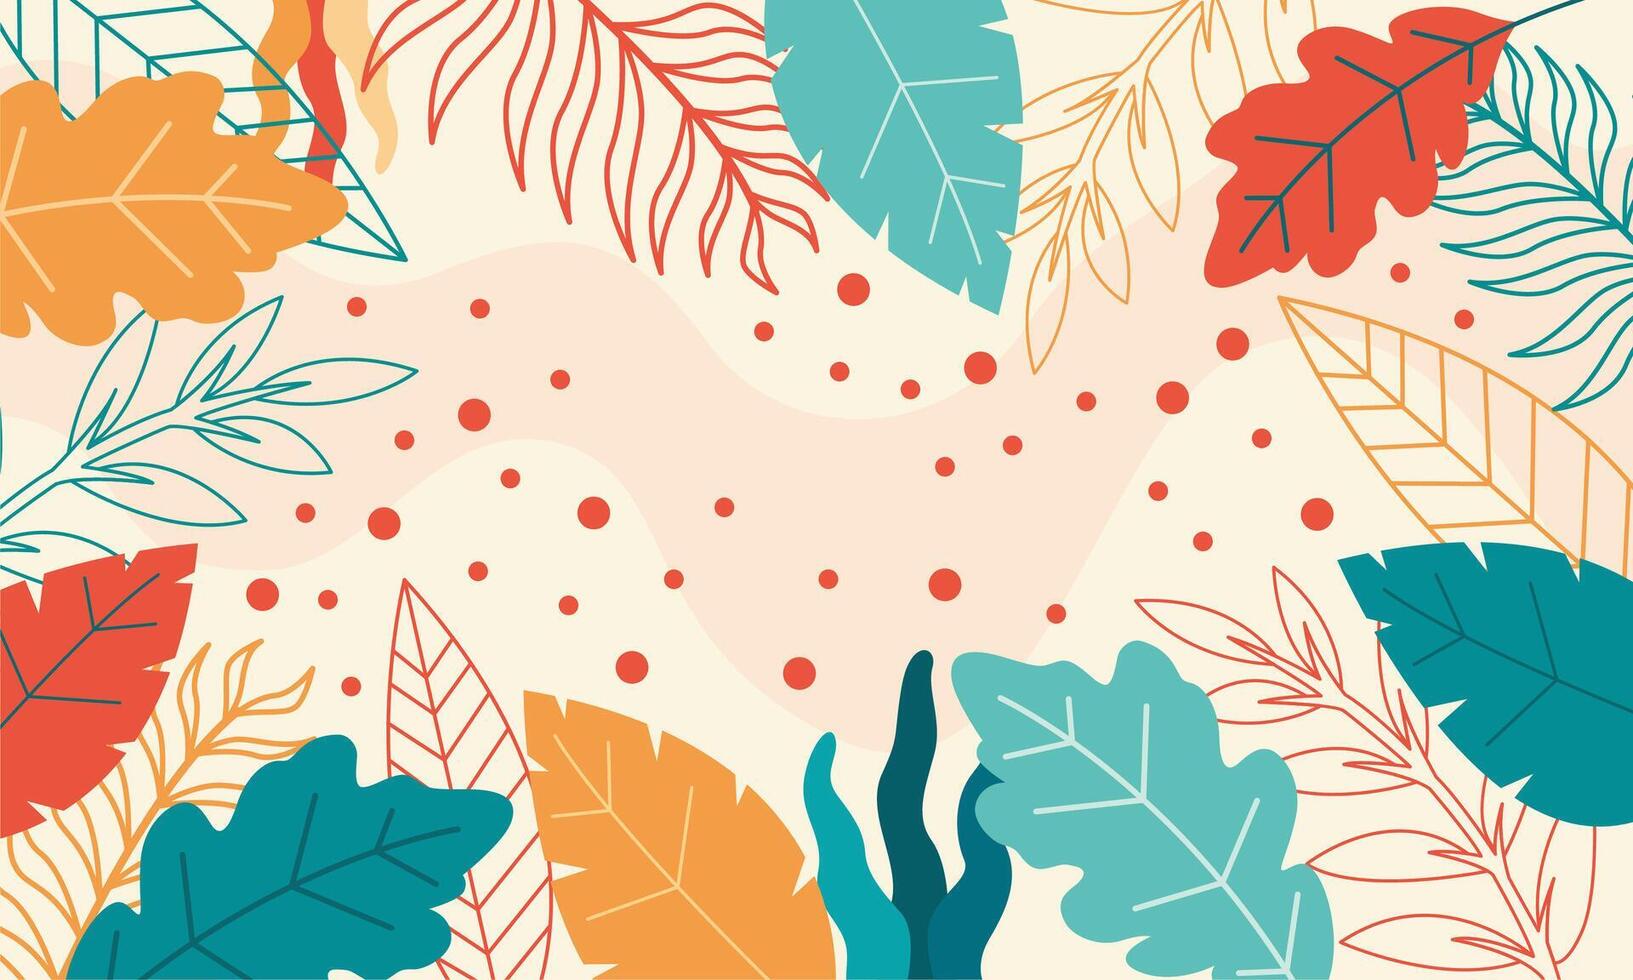 Flat design abstract floral background vector